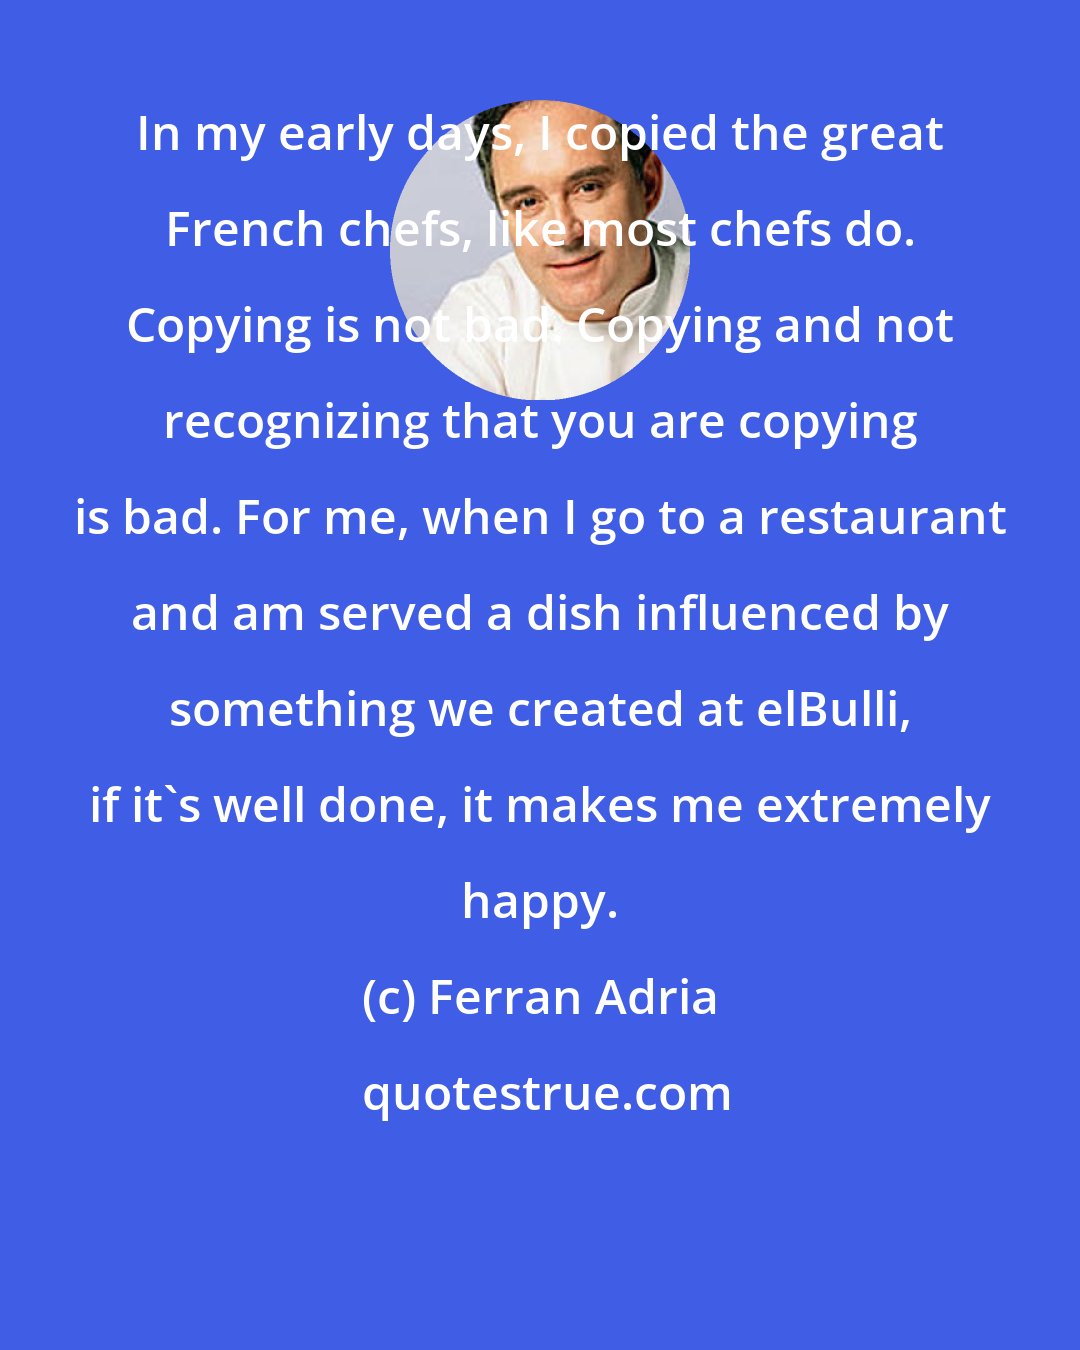 Ferran Adria: In my early days, I copied the great French chefs, like most chefs do. Copying is not bad. Copying and not recognizing that you are copying is bad. For me, when I go to a restaurant and am served a dish influenced by something we created at elBulli, if it's well done, it makes me extremely happy.